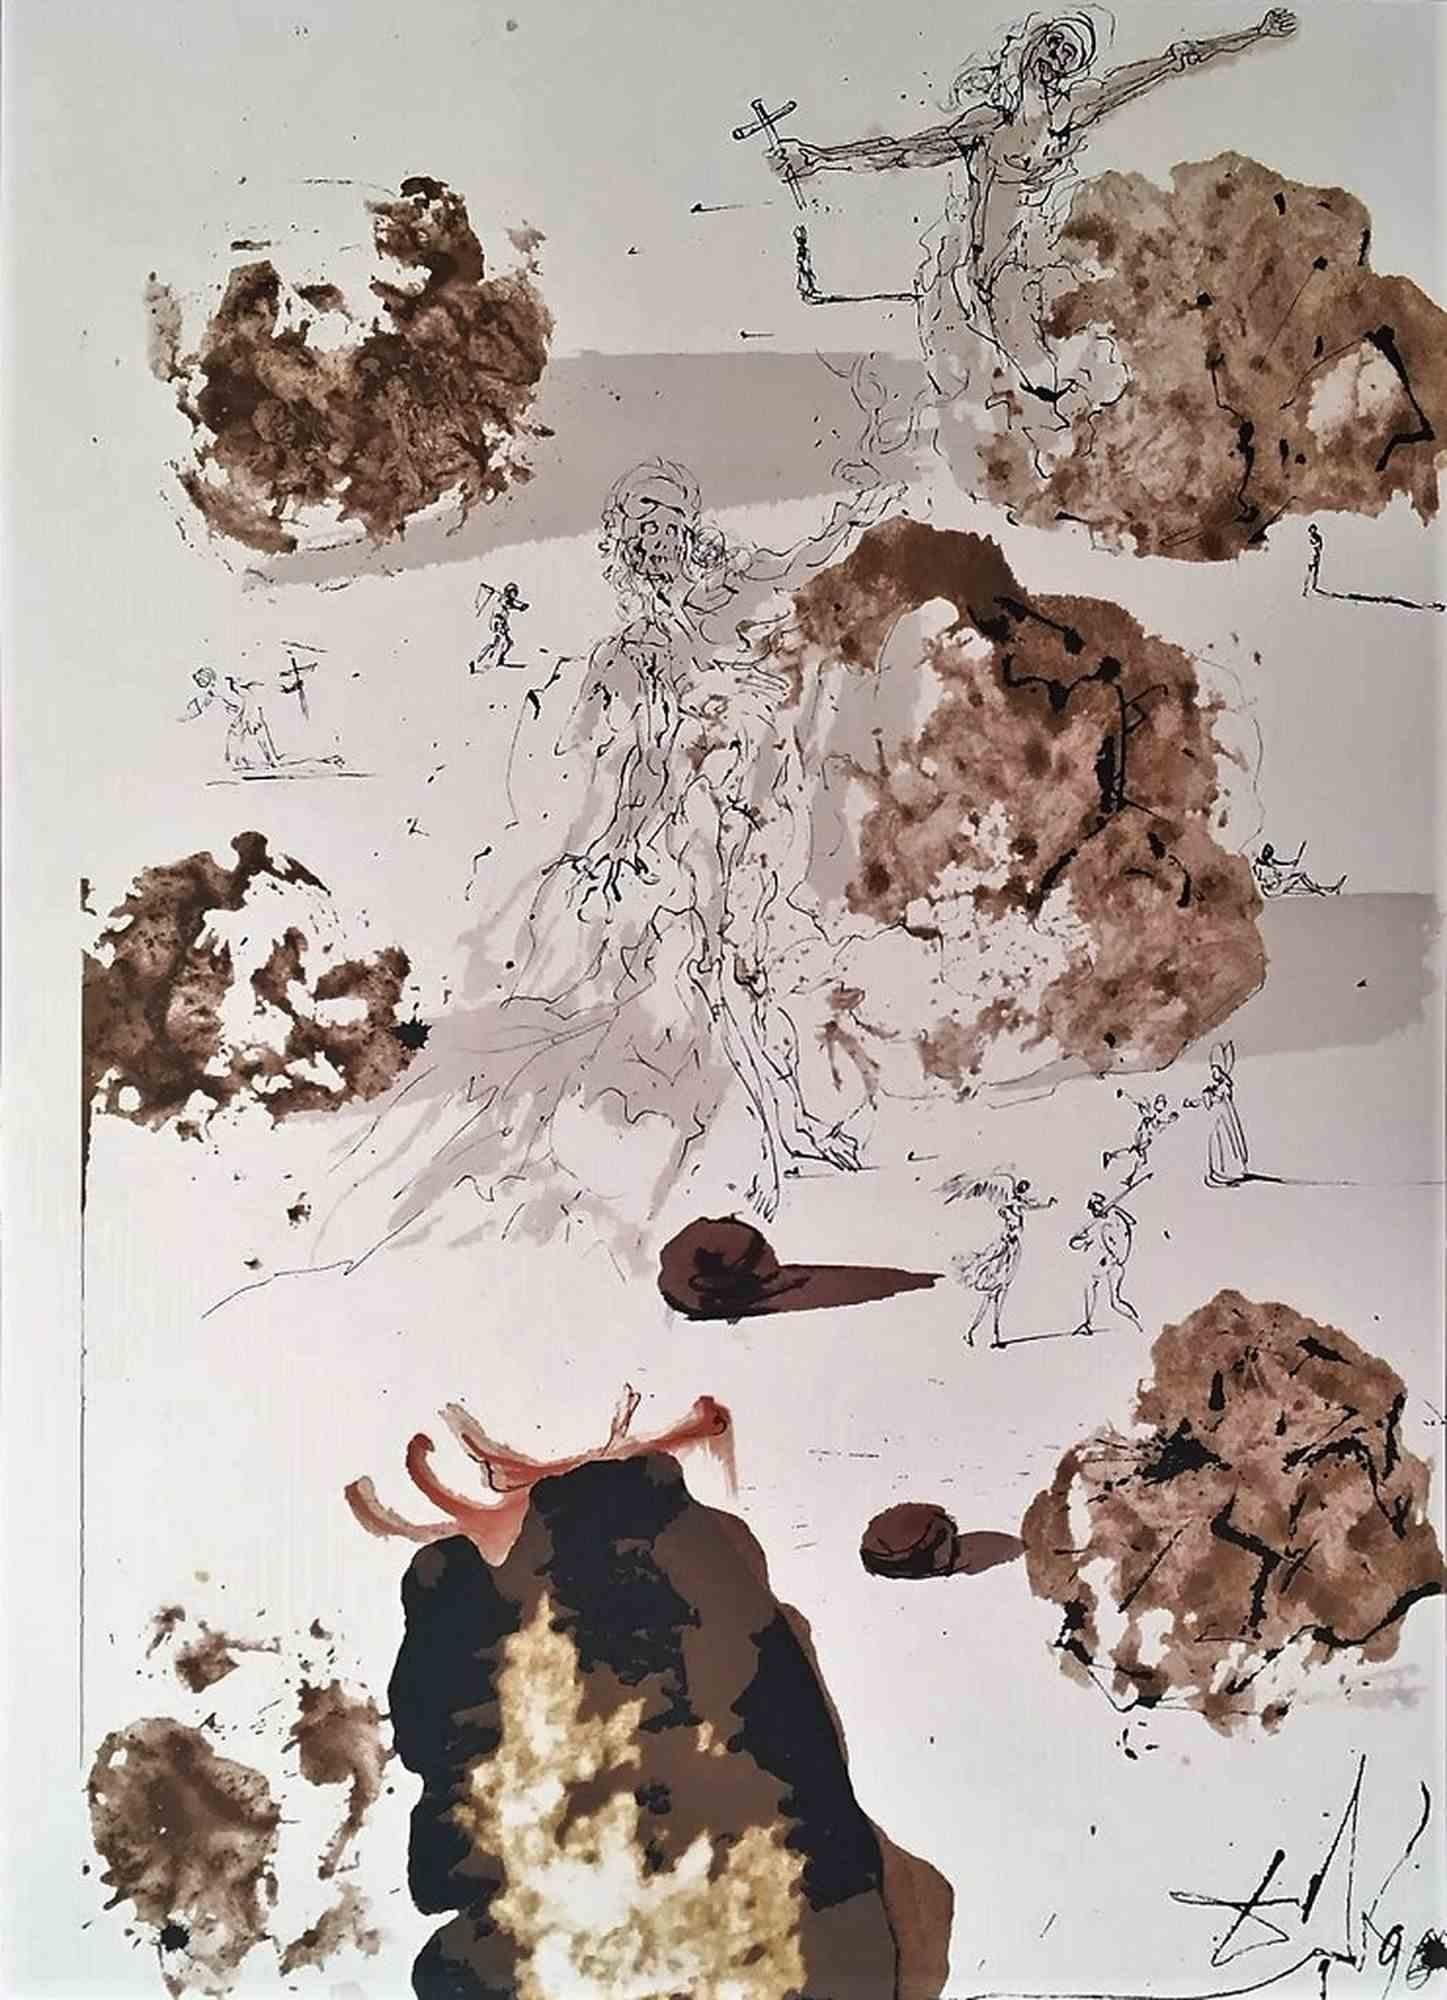 Salvador Dalí Figurative Print - Omnes Gentes in Valles Iosaphat - Lithograph - 1967